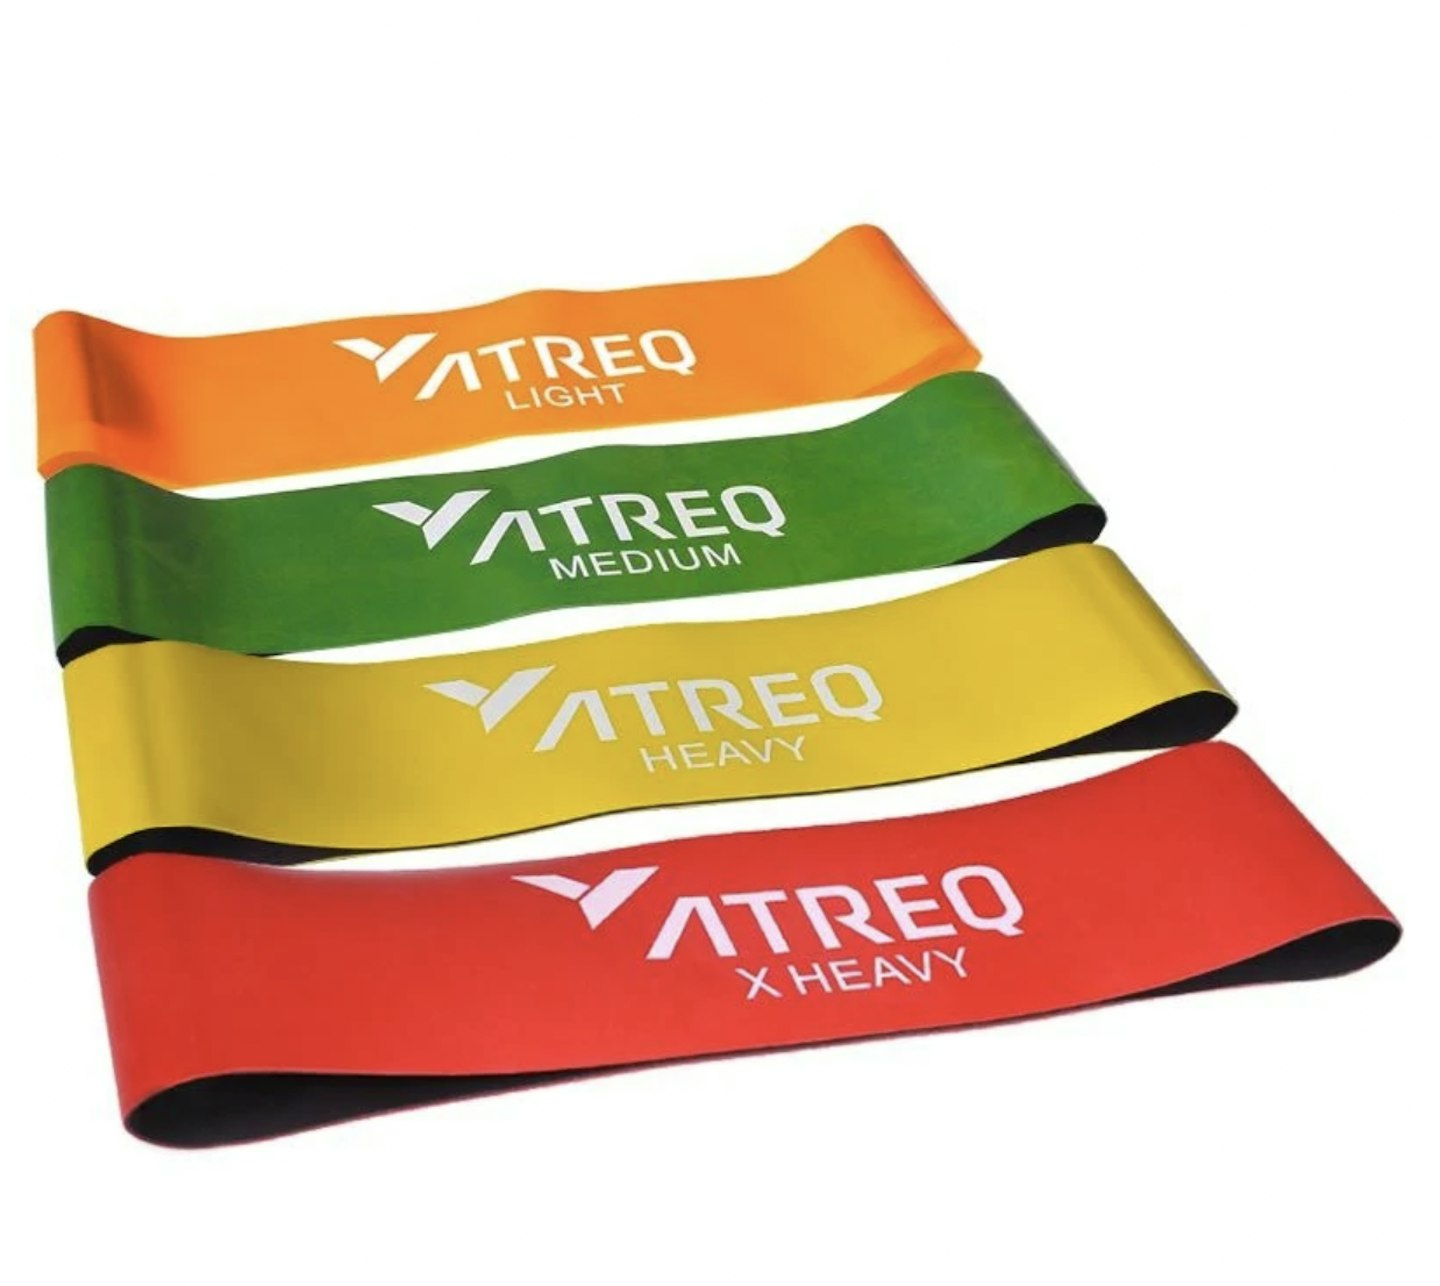 Arteq Loop Bands, from £2.38